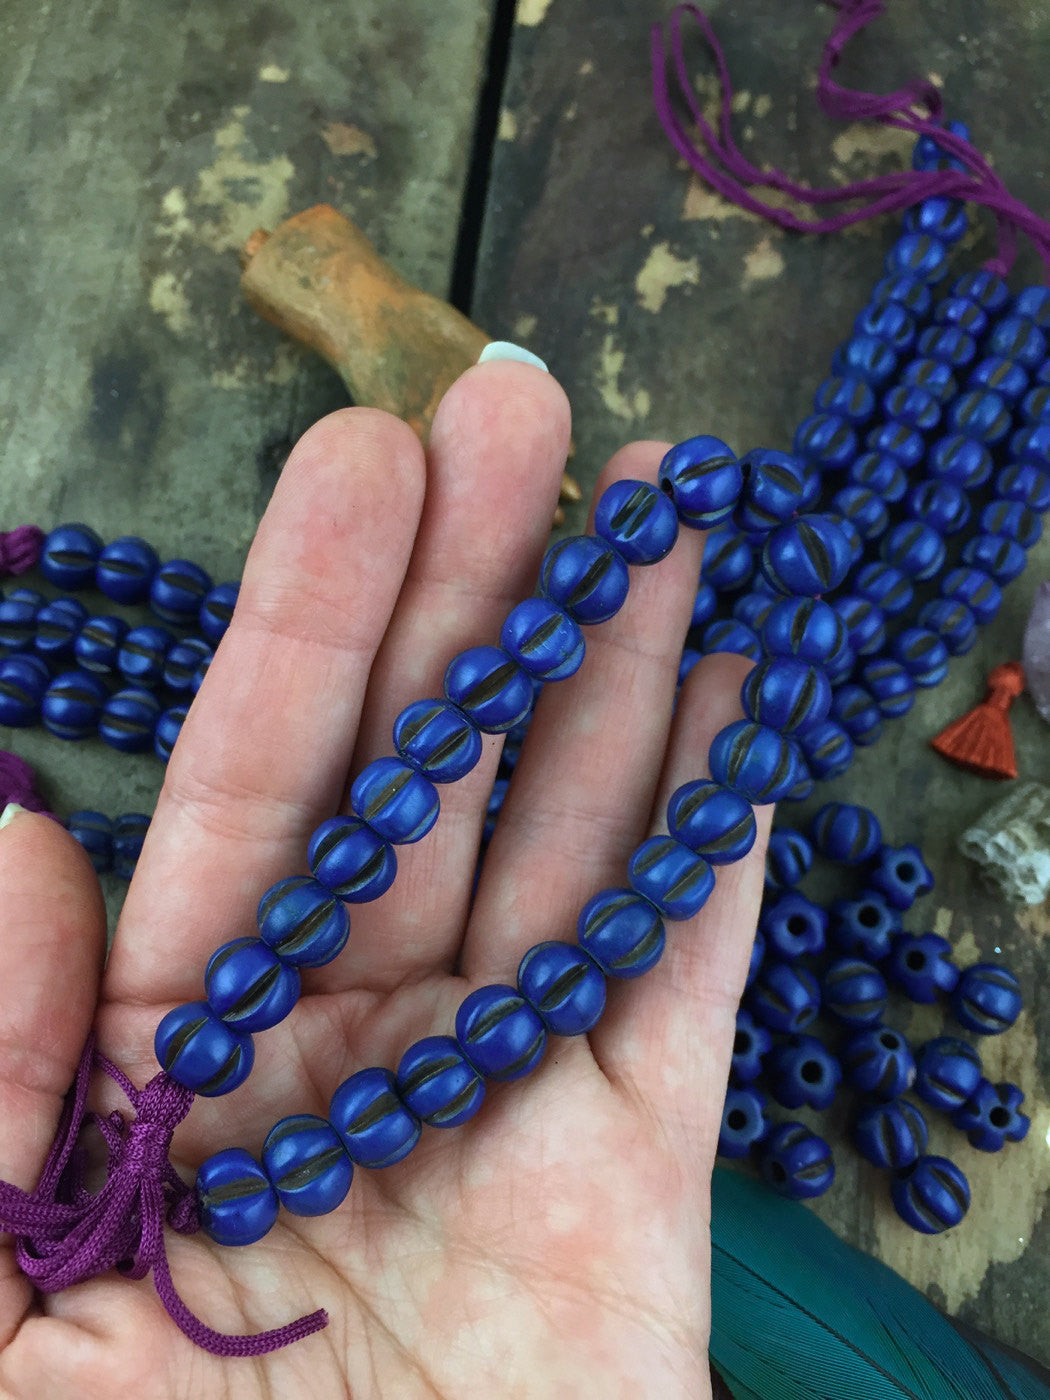 Blue Melon : Indigo Hand Carved Rondelle Stained Indian Bone Beads, 7x9mm, Natural Craft, Fall Jewelry Making Supplies, Bohemian, 25 pcs - ShopWomanShopsWorld.com. Bone Beads, Tassels, Pom Poms, African Beads.